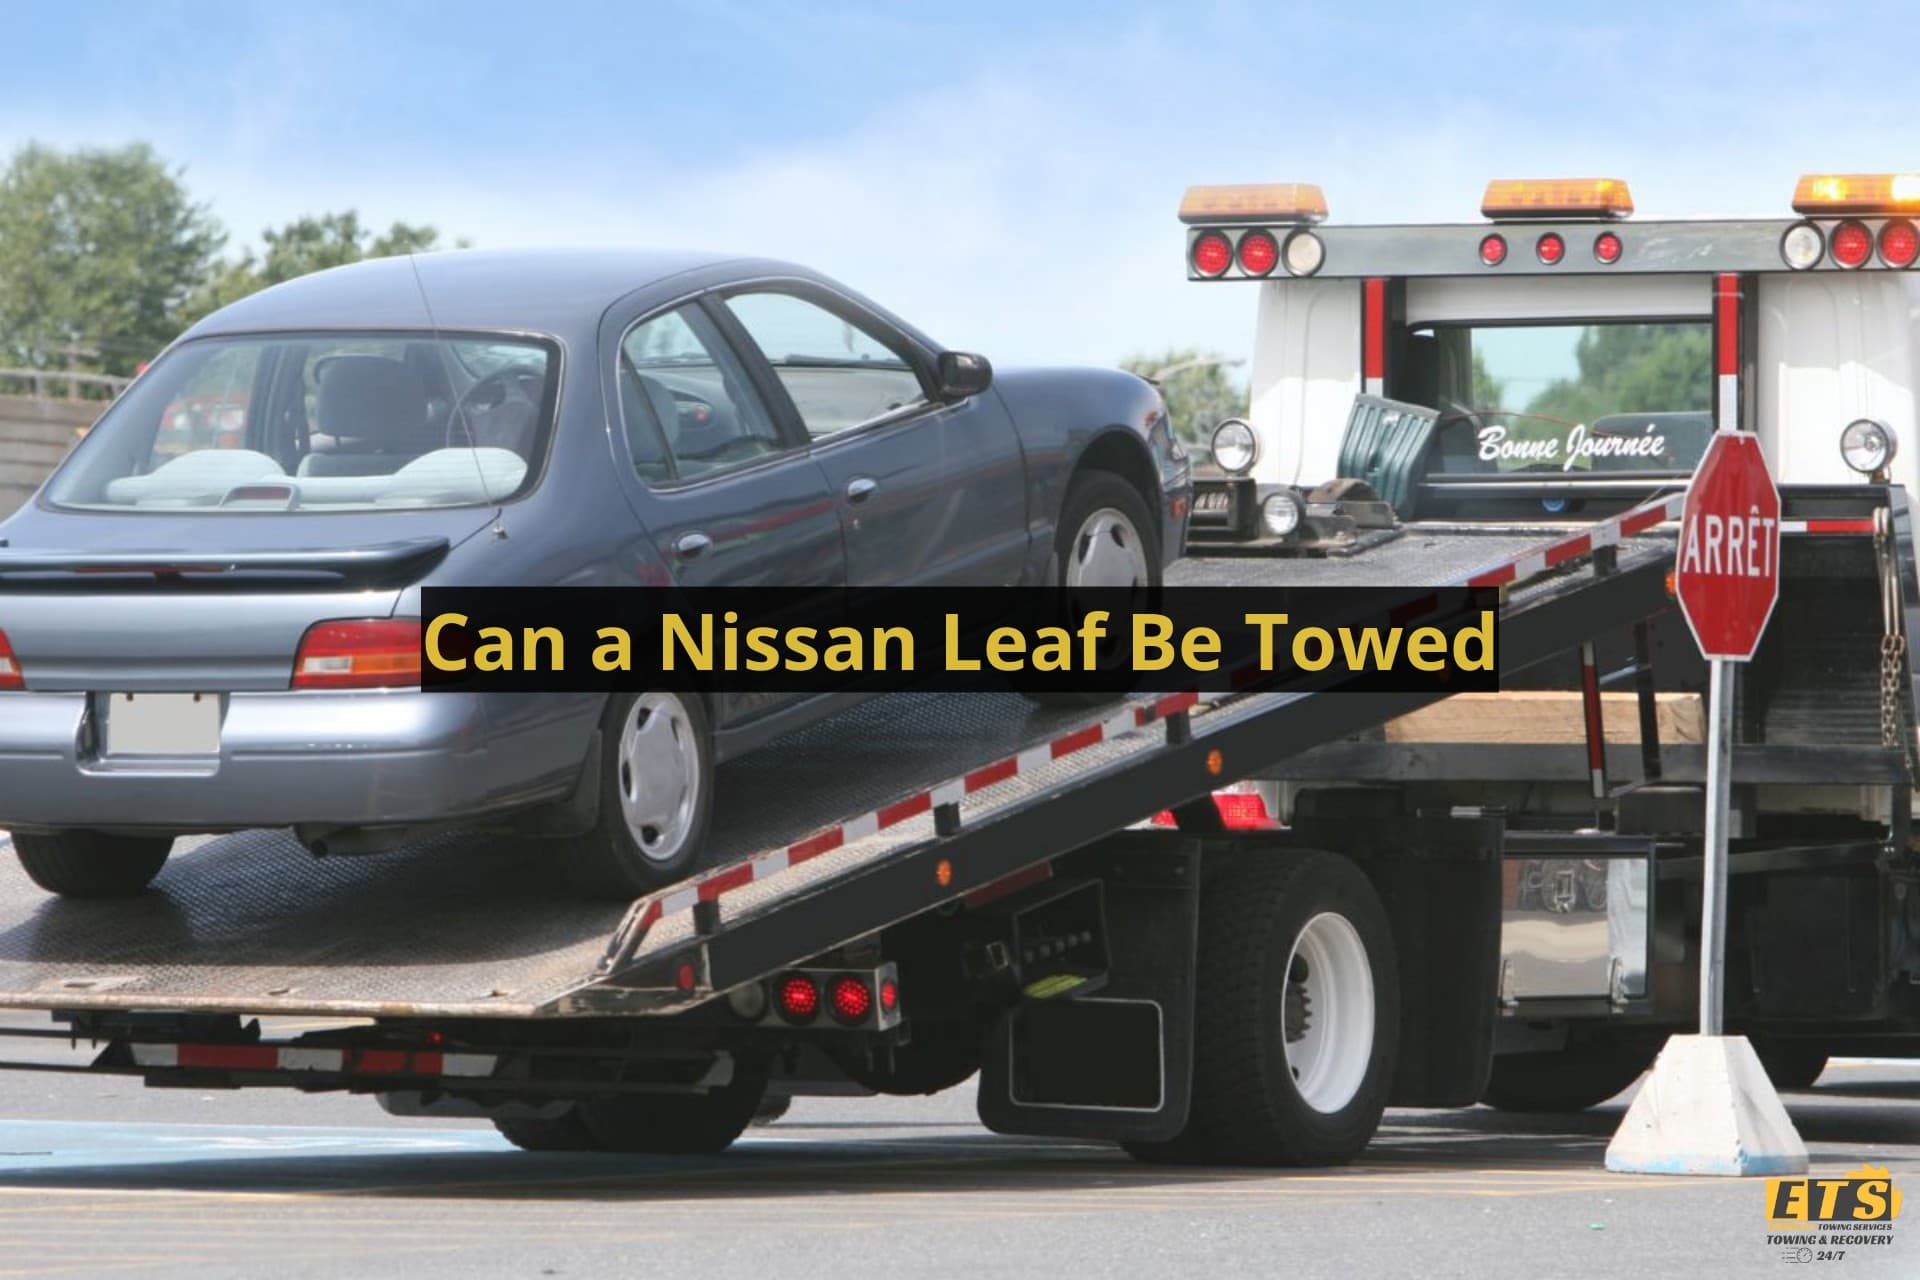 Can a Nissan Leaf Be Towed